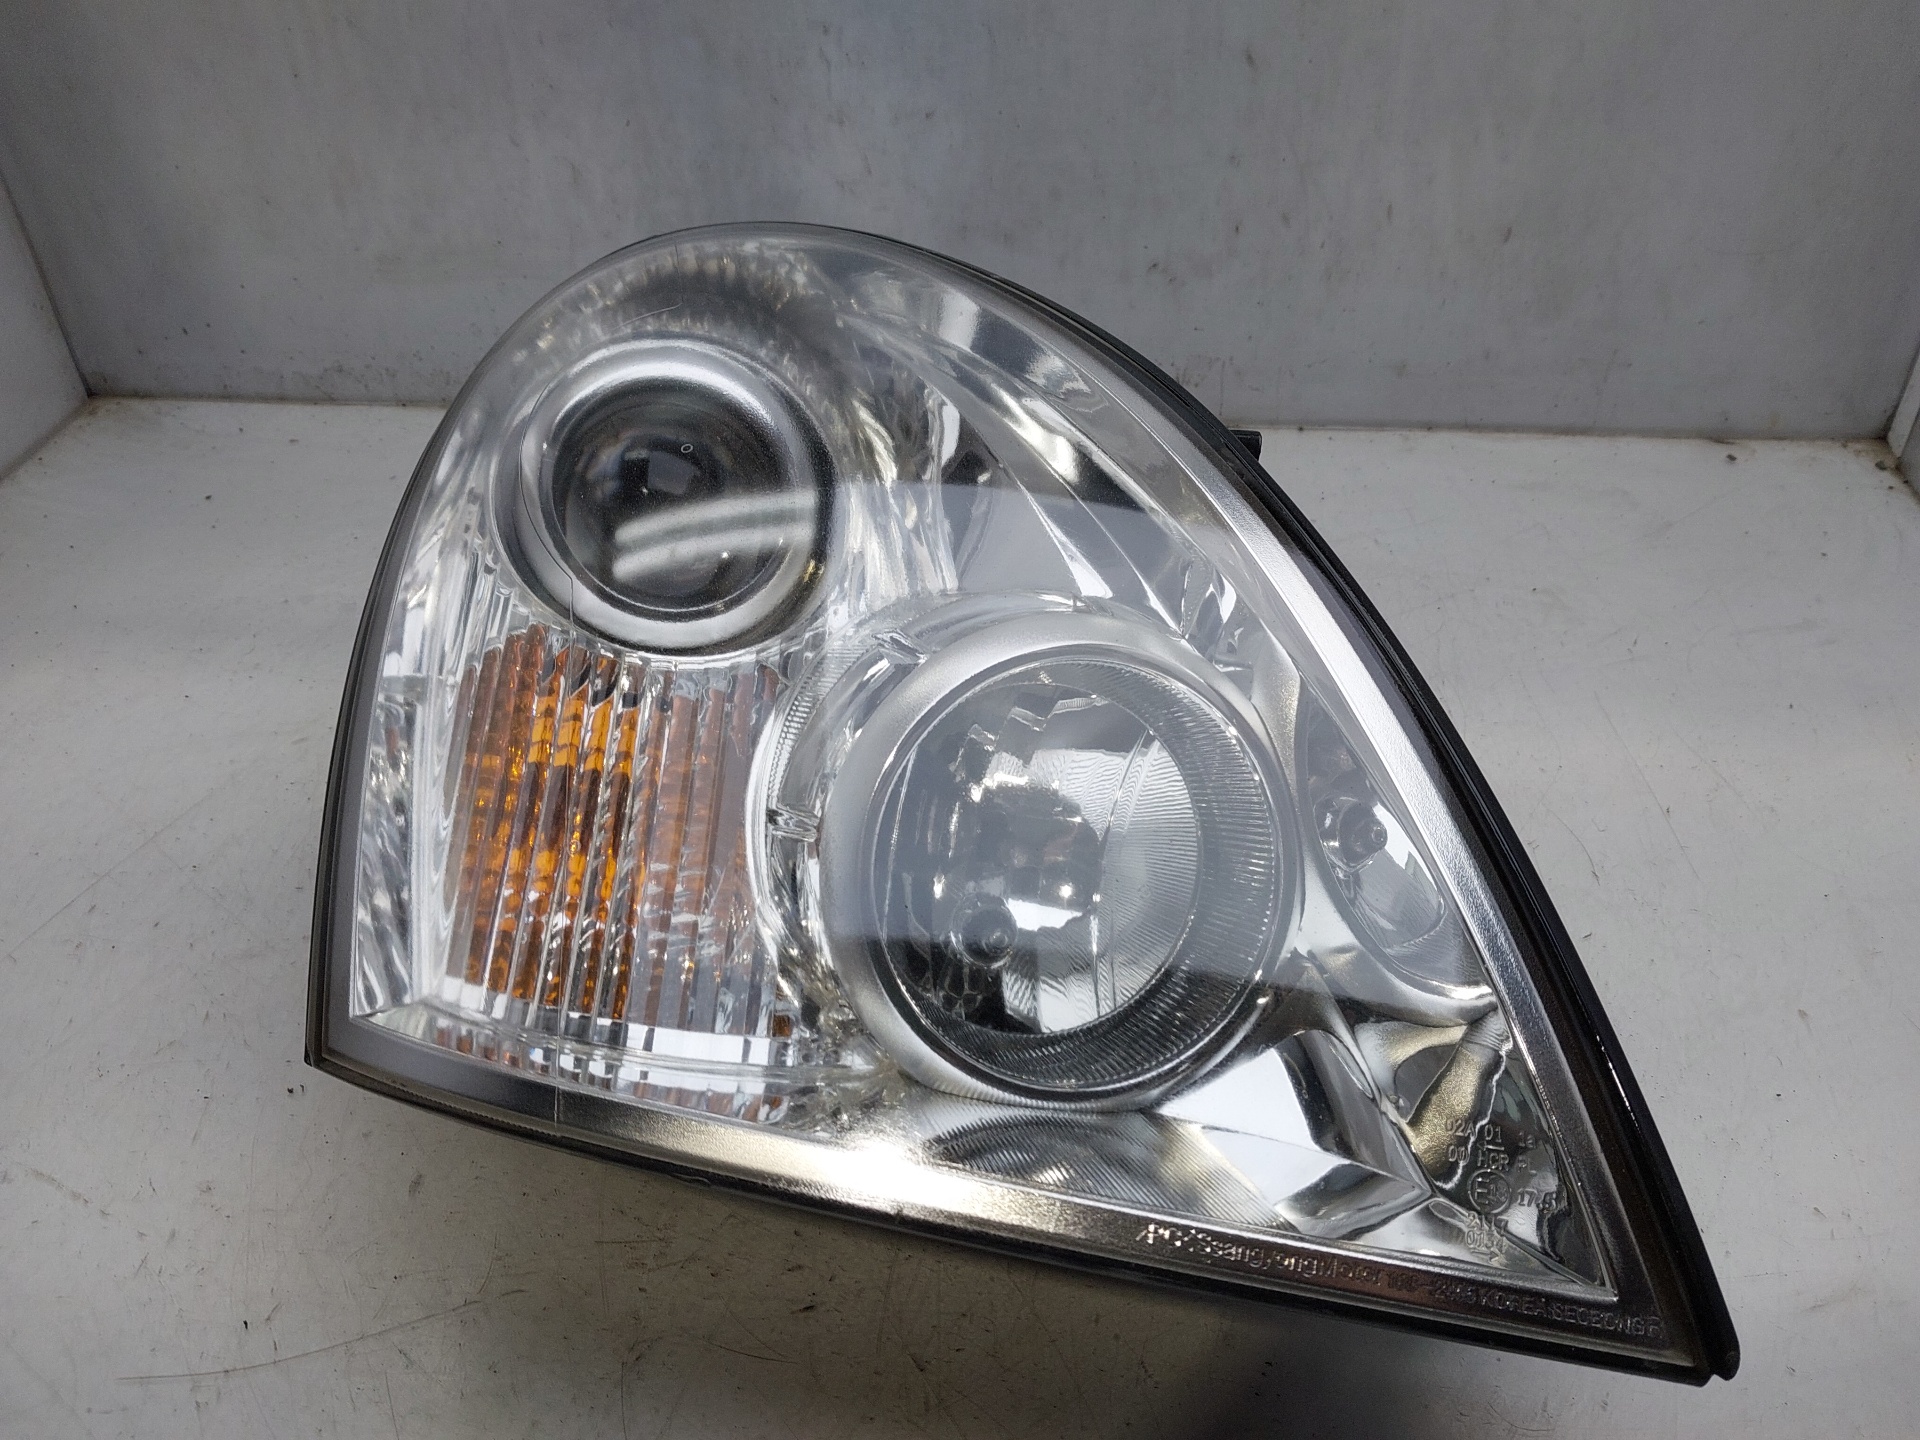 SSANGYONG Rexton Y200 (2001-2007) Front Right Headlight 8310208103HBC 25008503